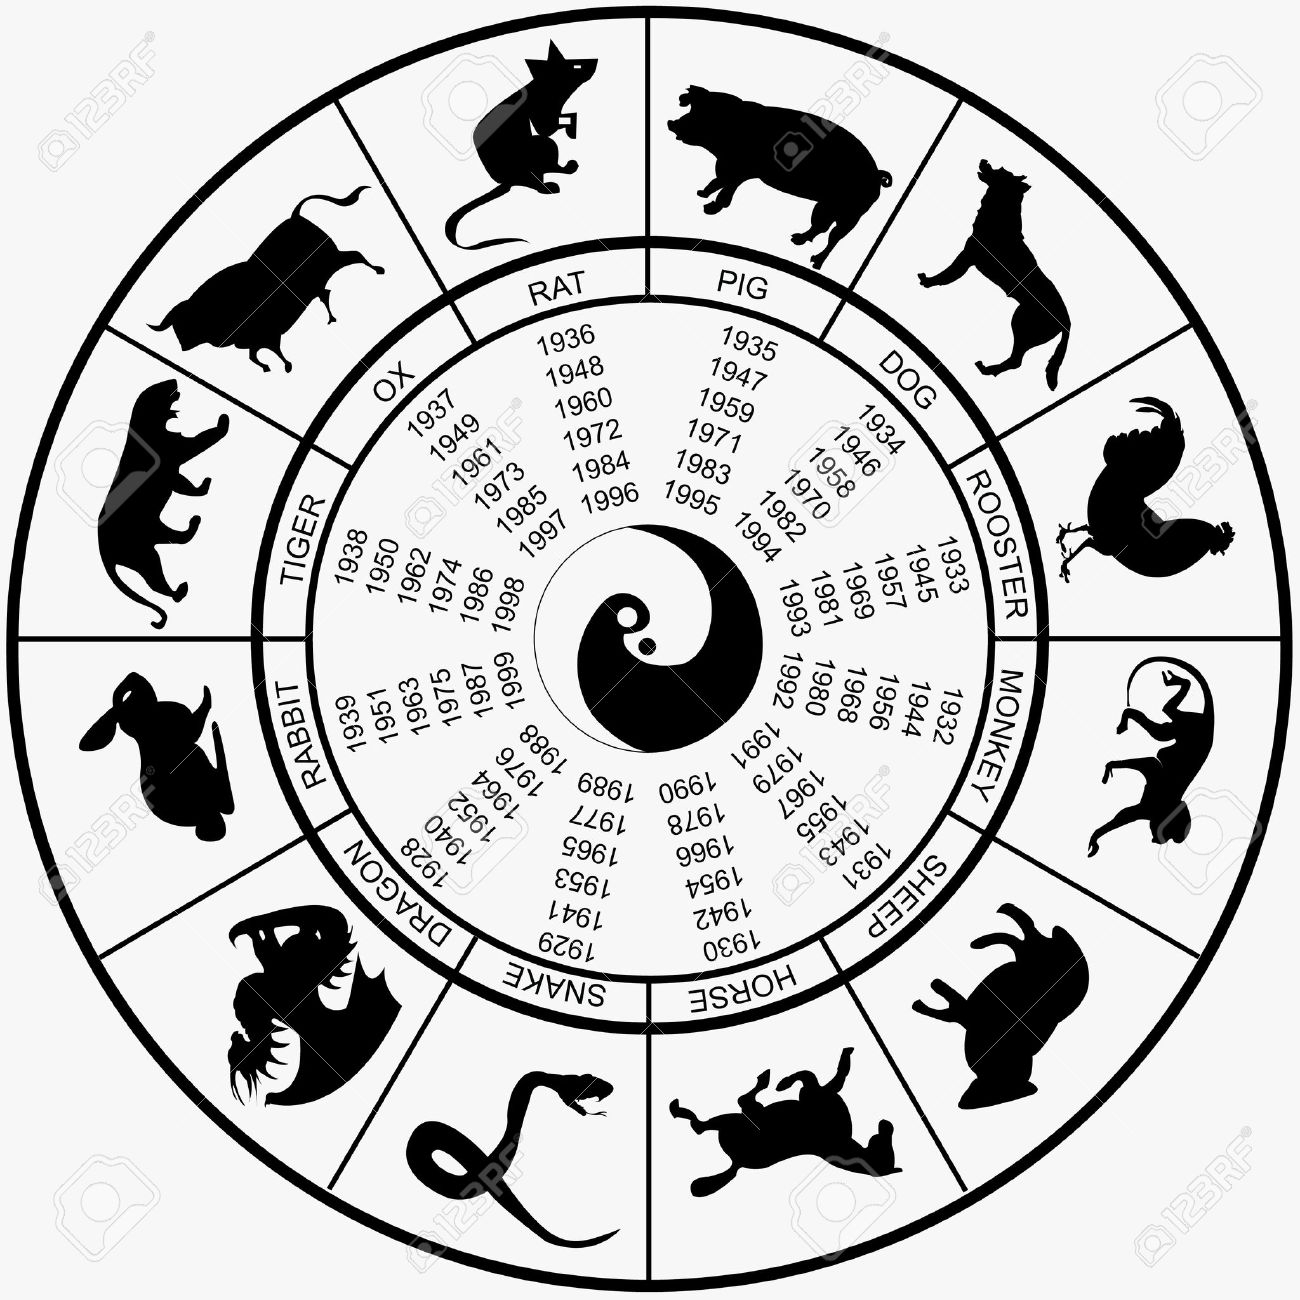 Vector Illustration Of A Chinese Horoscope Wheel With Years